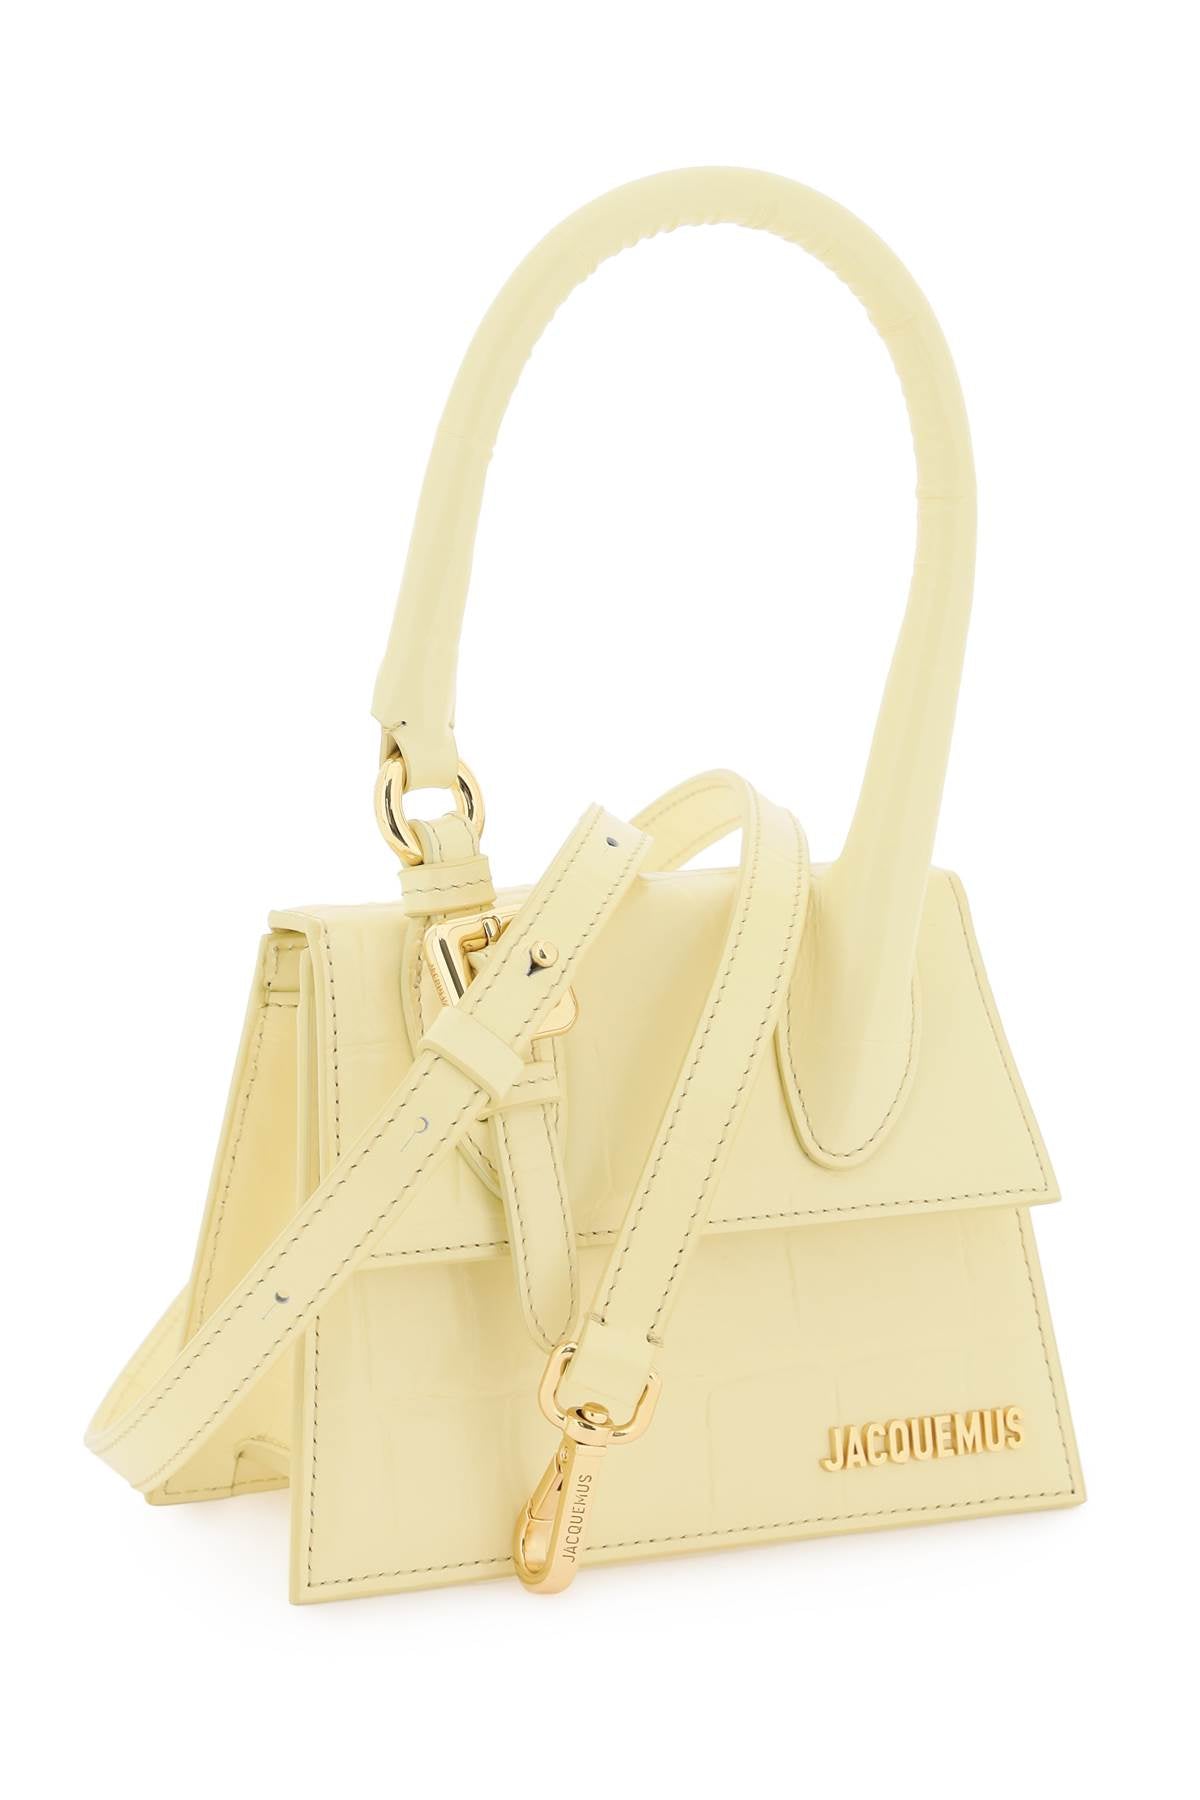 JACQUEMUS Yellow Croco-Embossed Leather Handbag with Gold Hardware and Ring Detail